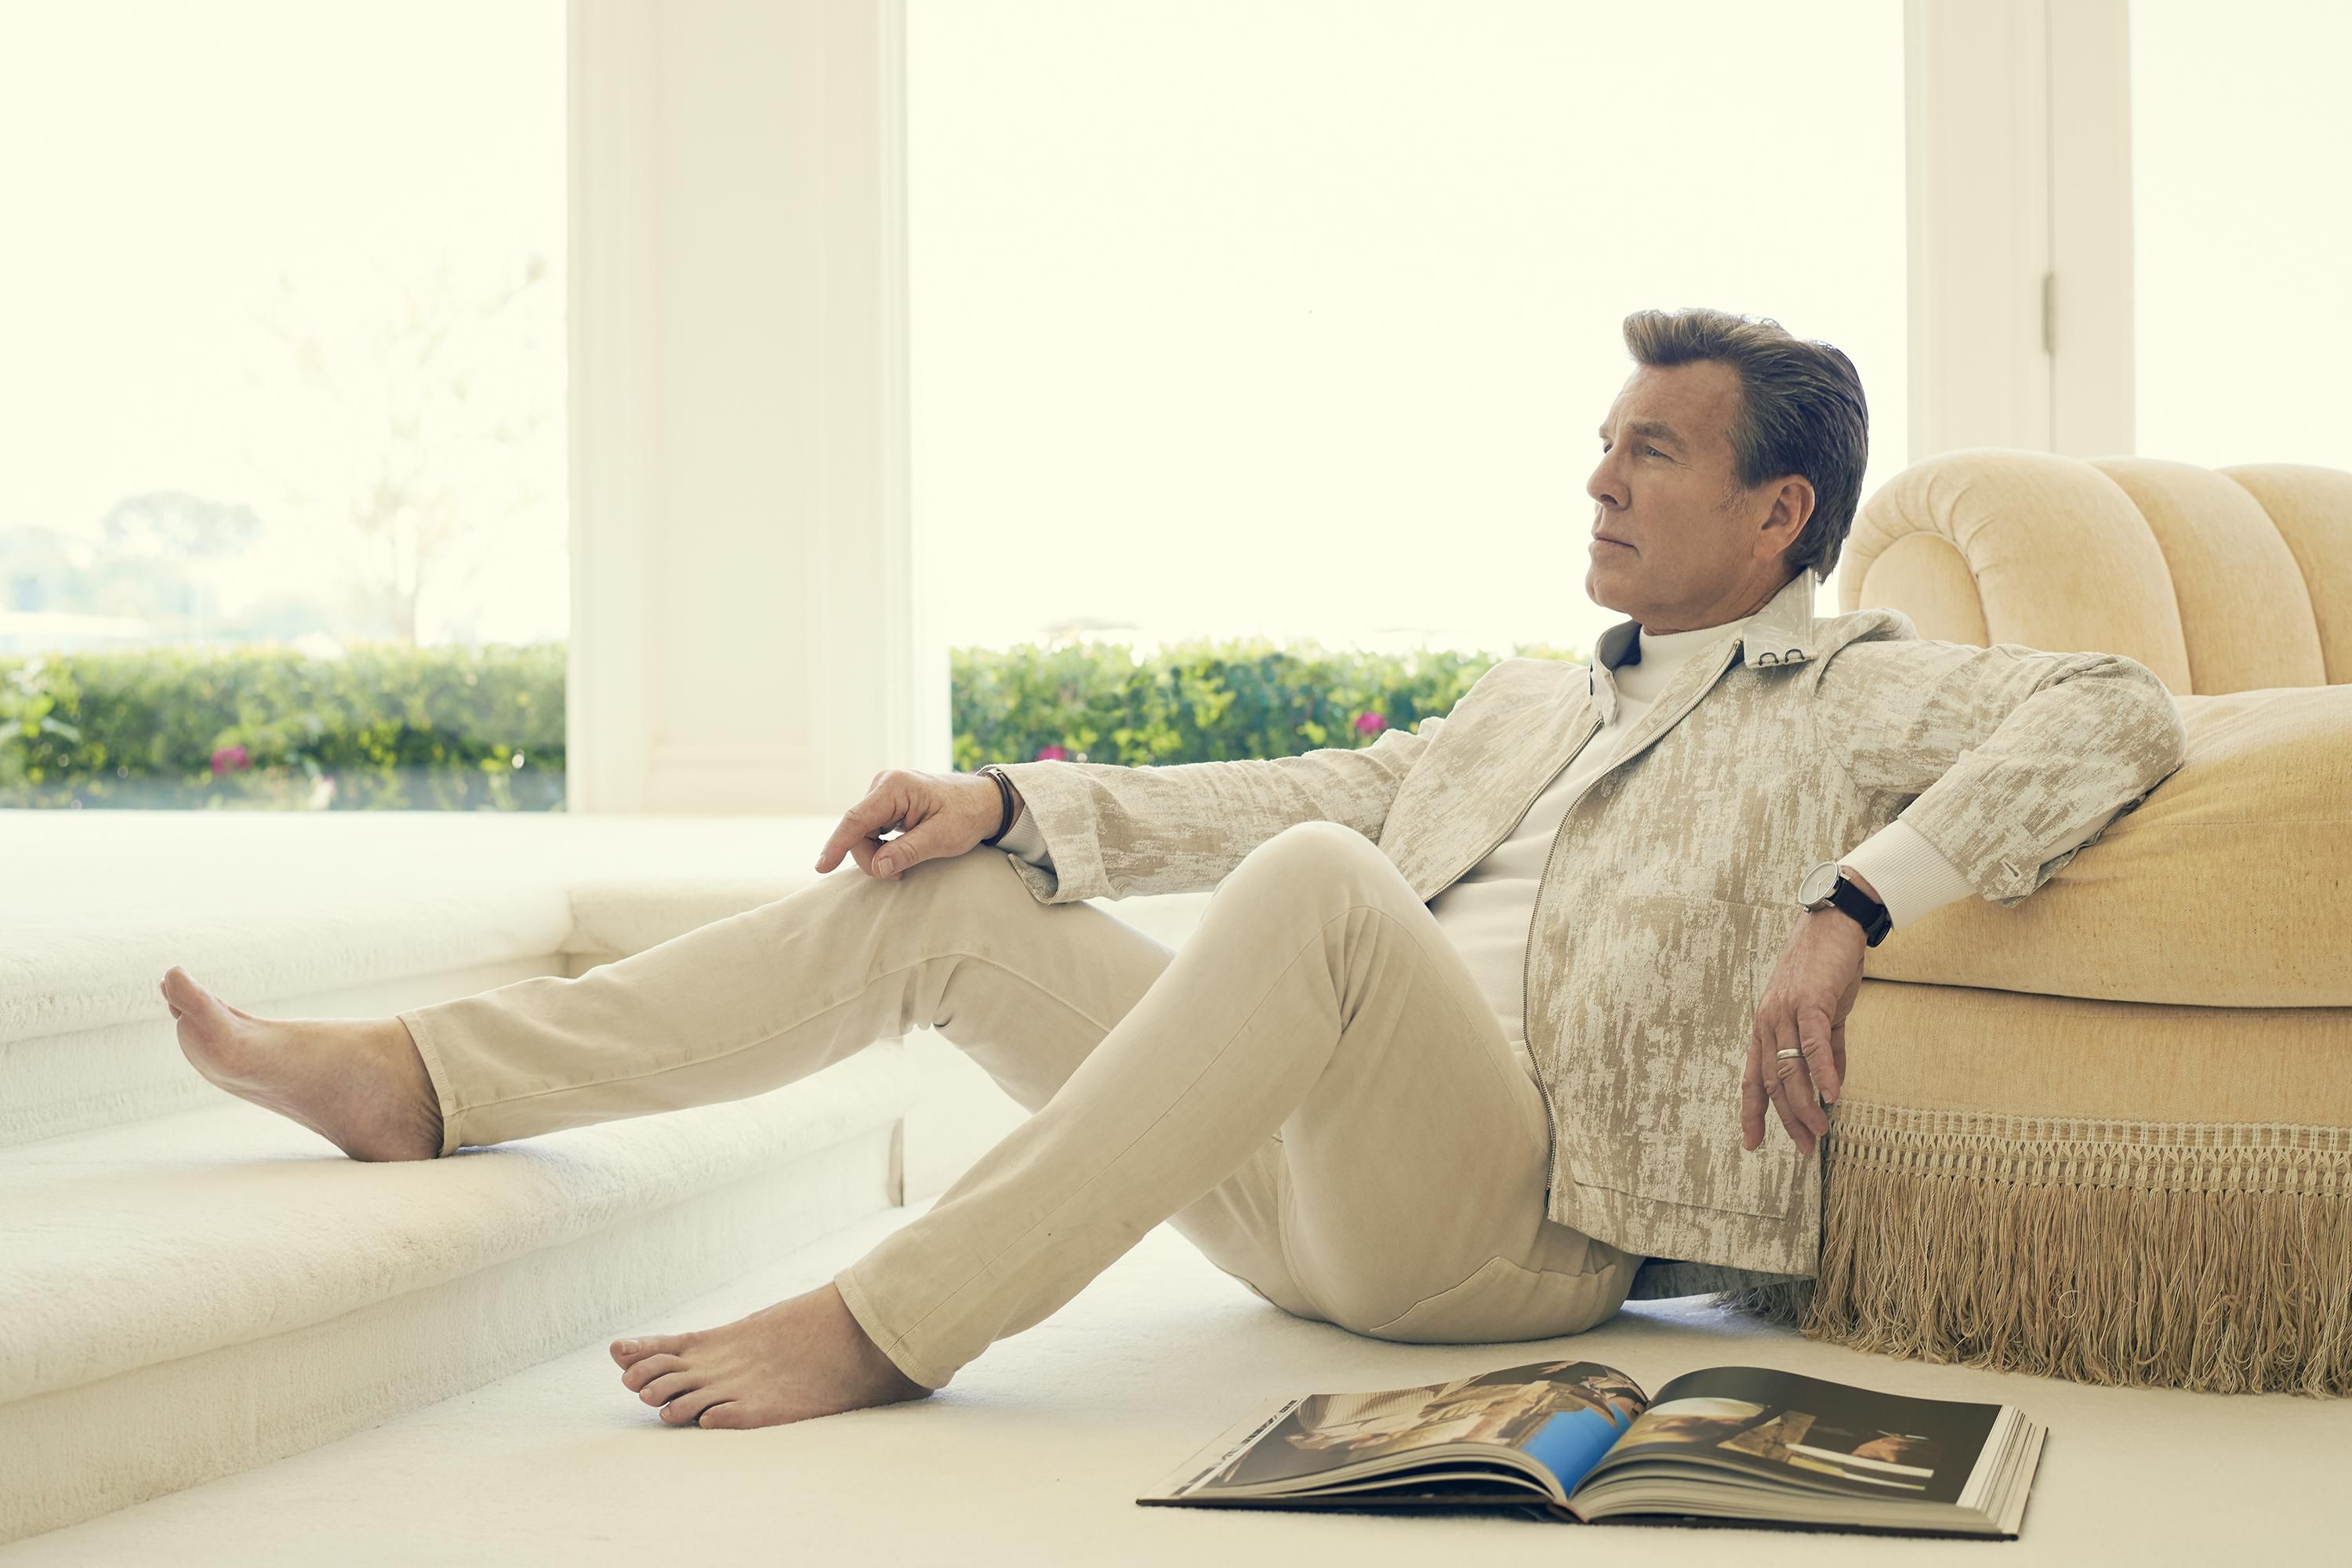 Peter Bergman wears a beige jacket and pants while sitting on a cream carpet next to an open art book. He leans his left arm against a chair and looks into the distance